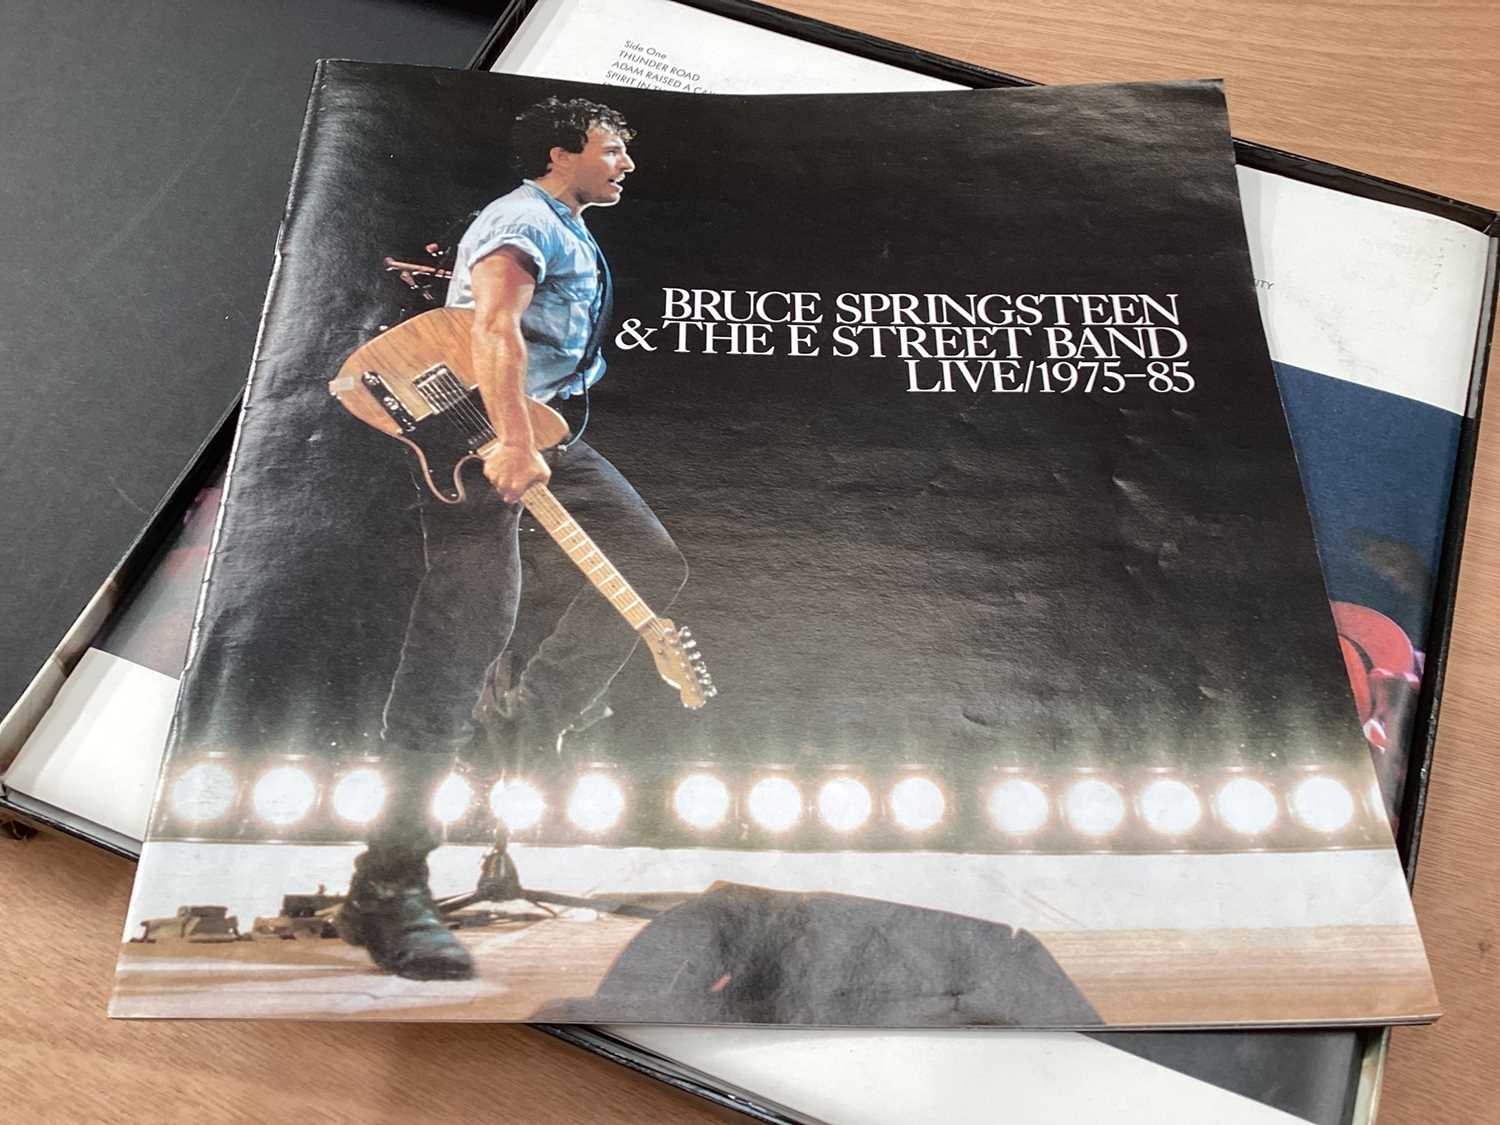 Queen - The Complete Works, boxed set together with Springsteen boxed set - Live 75-85 (2) - Image 8 of 9